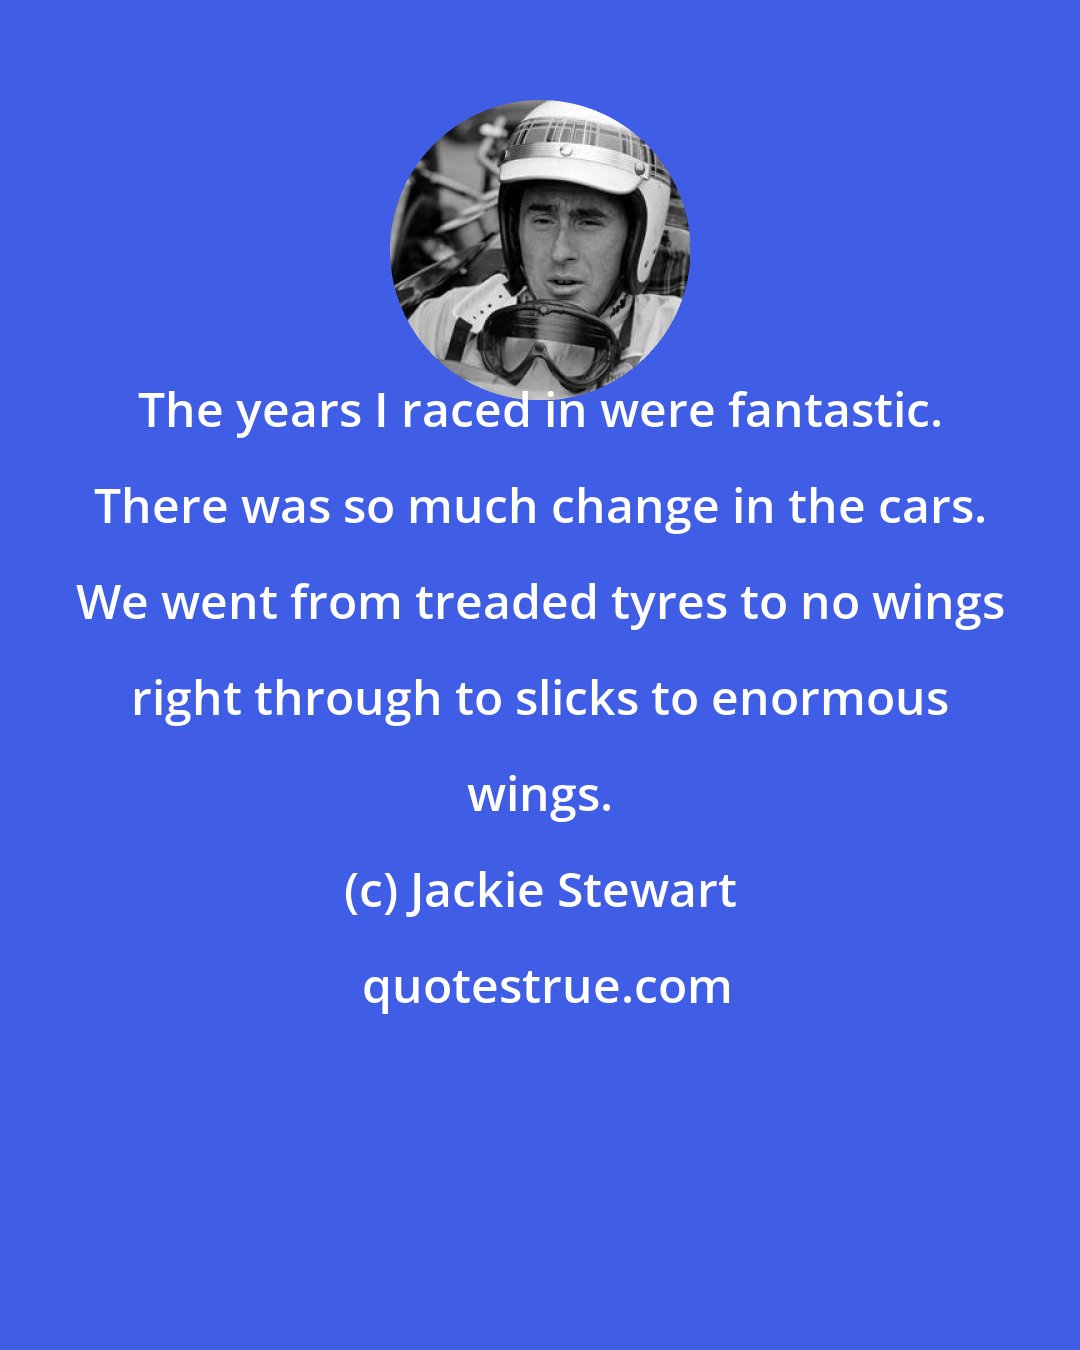 Jackie Stewart: The years I raced in were fantastic. There was so much change in the cars. We went from treaded tyres to no wings right through to slicks to enormous wings.